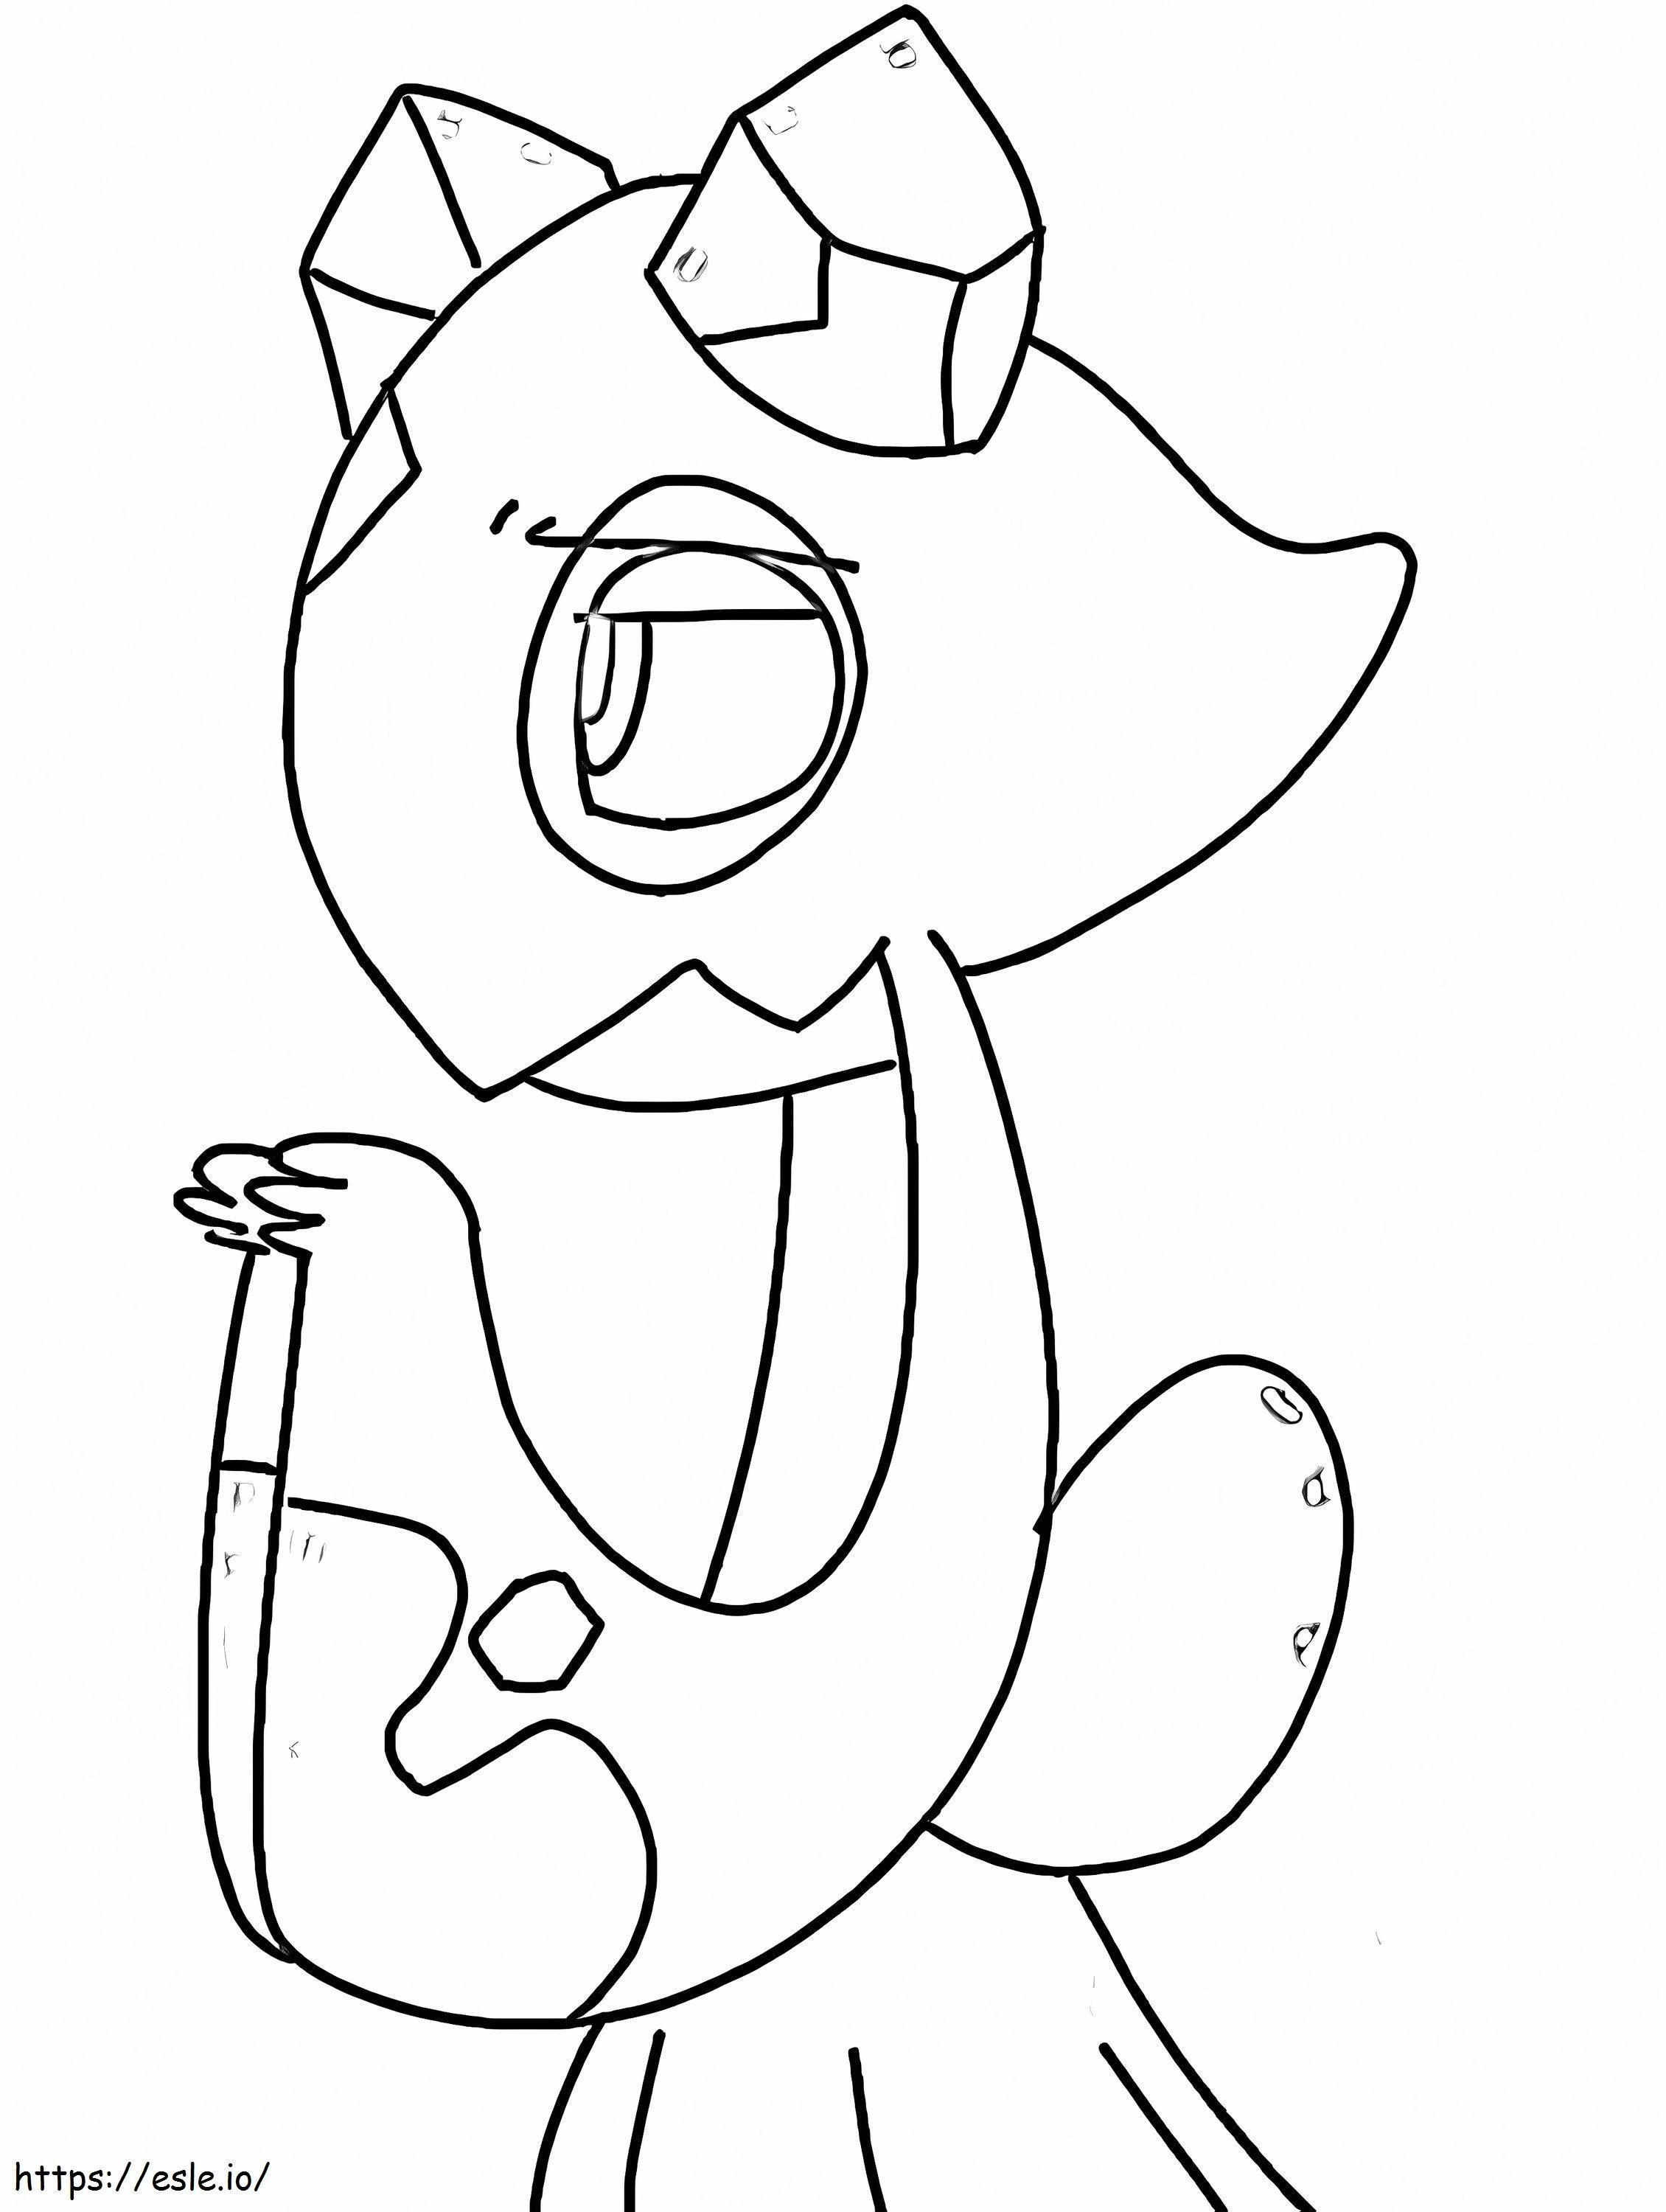 Froslass 4 coloring page